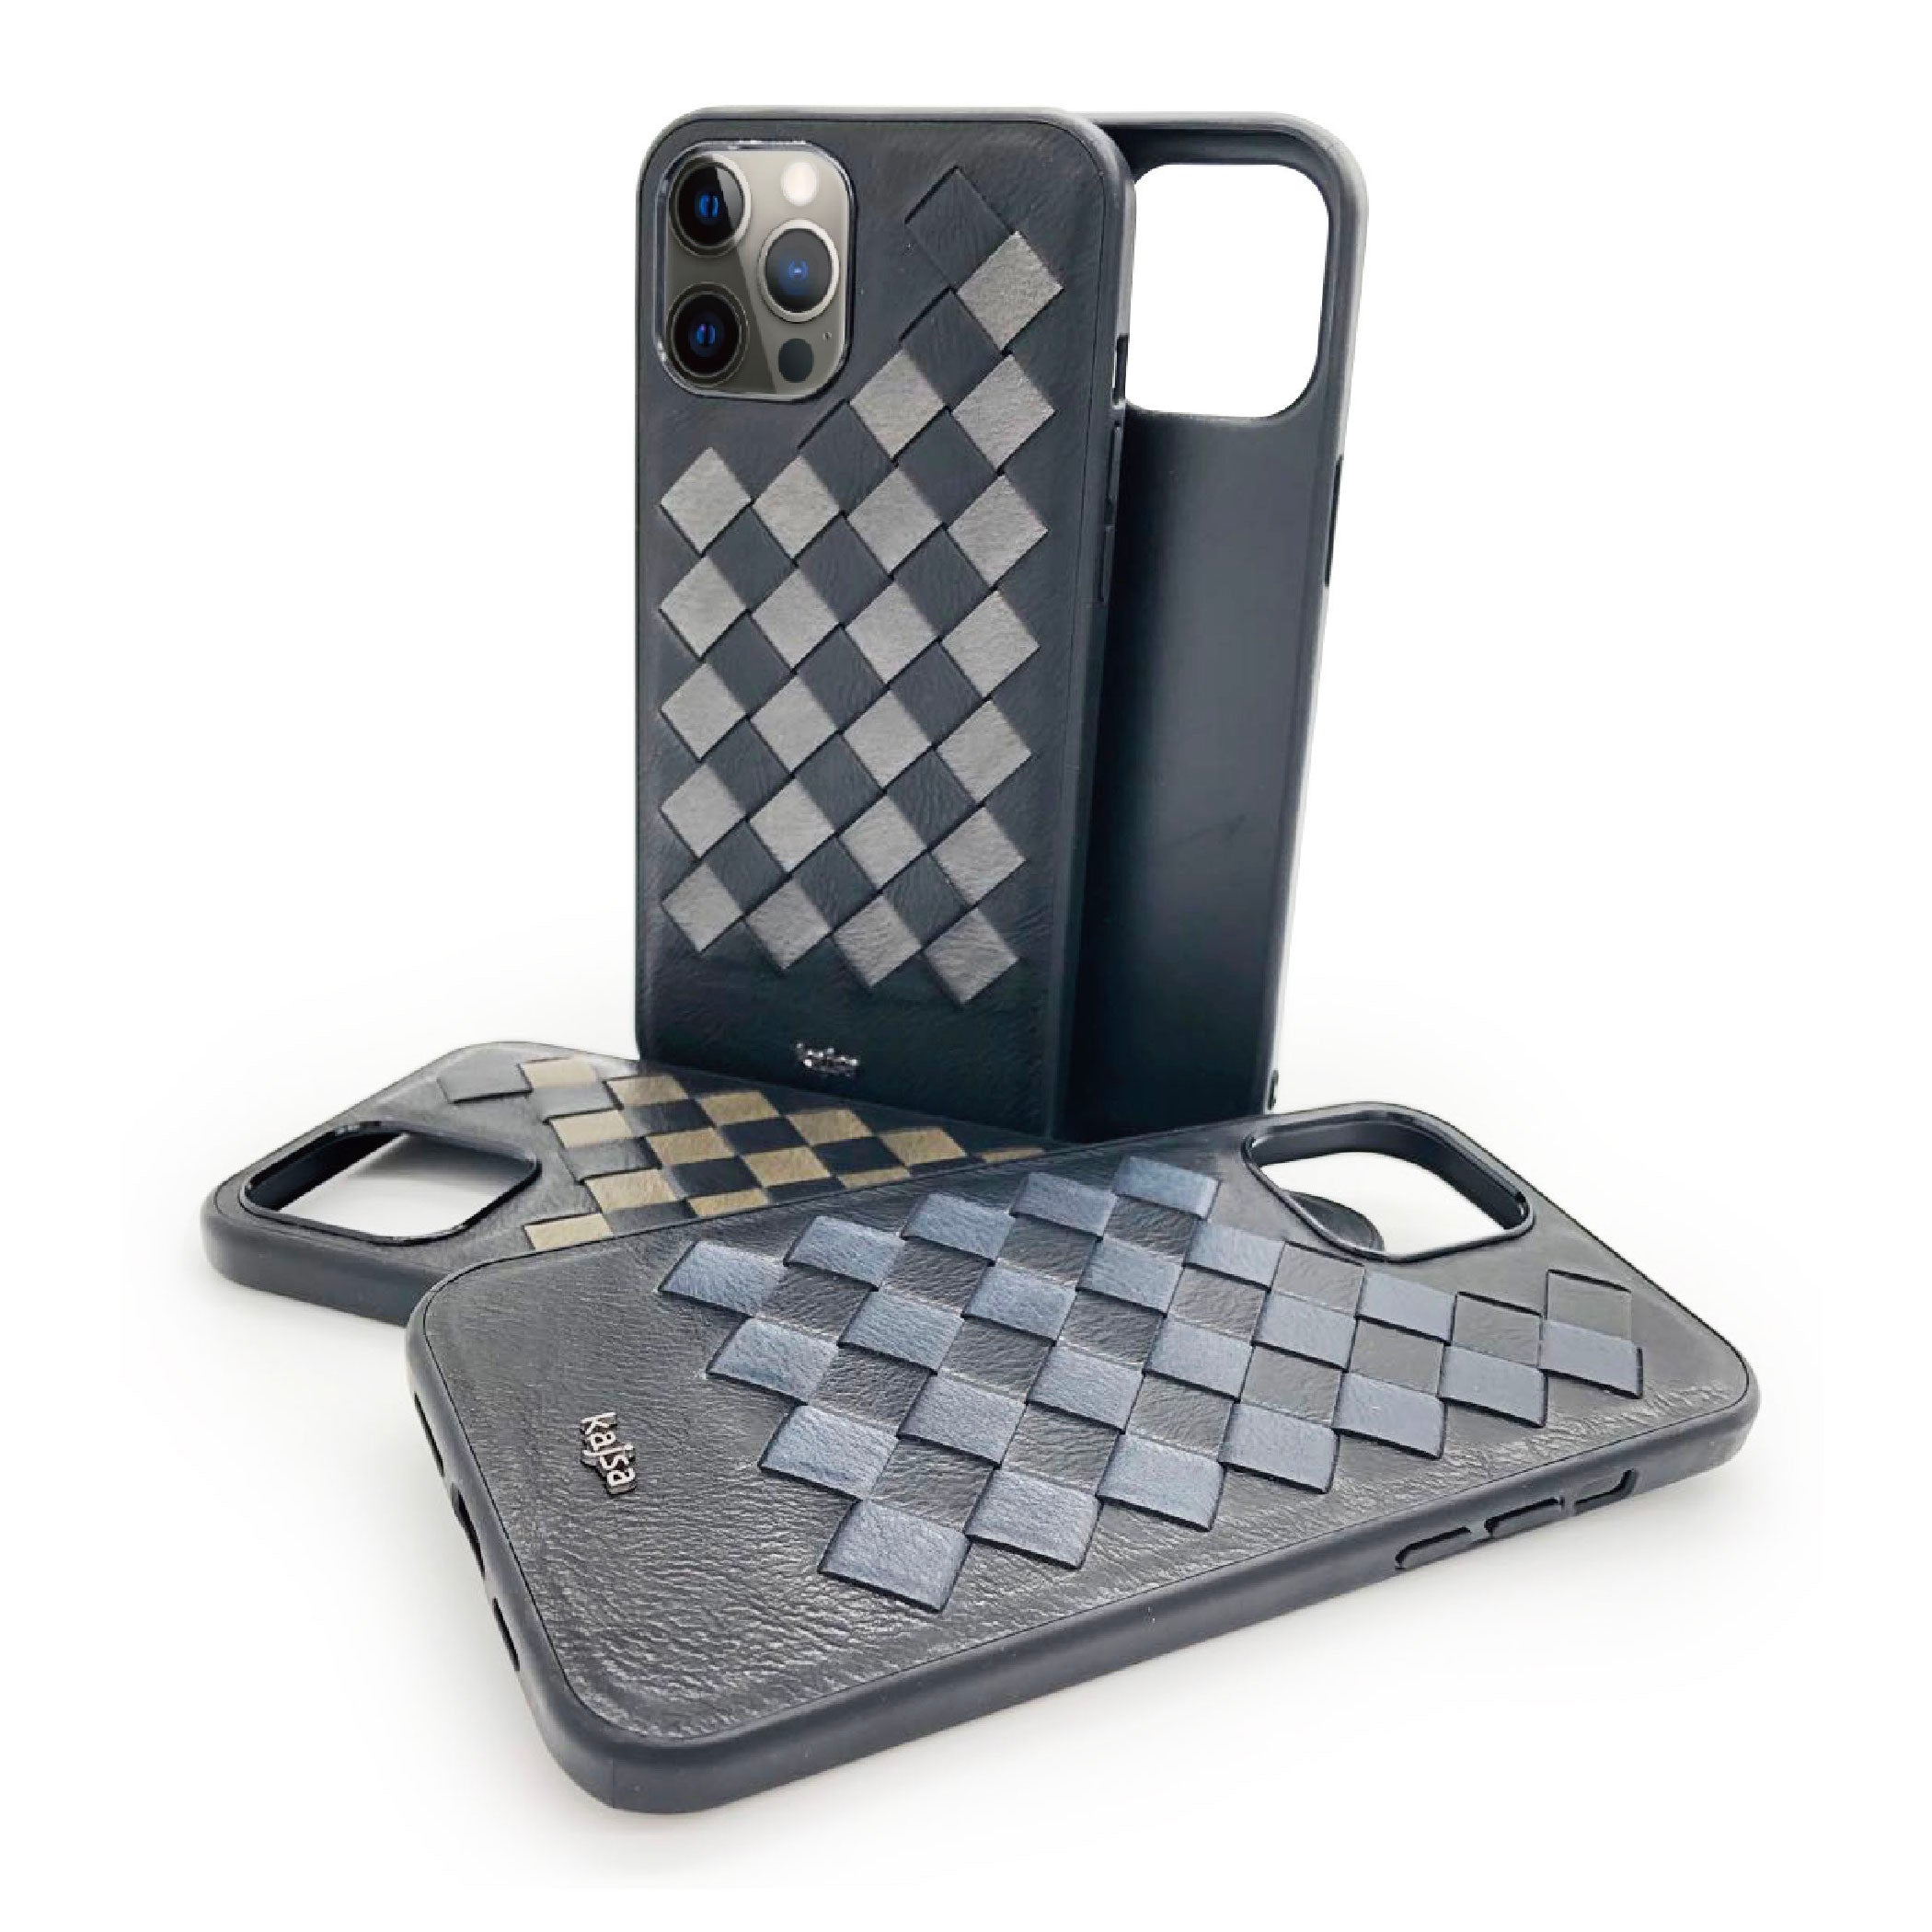 Preppie Collection - Dice Woven Back Case for iPhone 12-Phone Case- phone case - phone cases- phone cover- iphone cover- iphone case- iphone cases- leather case- leather cases- DIYCASE - custom case - leather cover - hand strap case - croco pattern case - snake pattern case - carbon fiber phone case - phone case brand - unique phone case - high quality - phone case brand - protective case - buy phone case hong kong - online buy phone case - iphone‎手機殼 - 客製化手機殼 - samsung ‎手機殼 - 香港手機殼 - 買電話殼